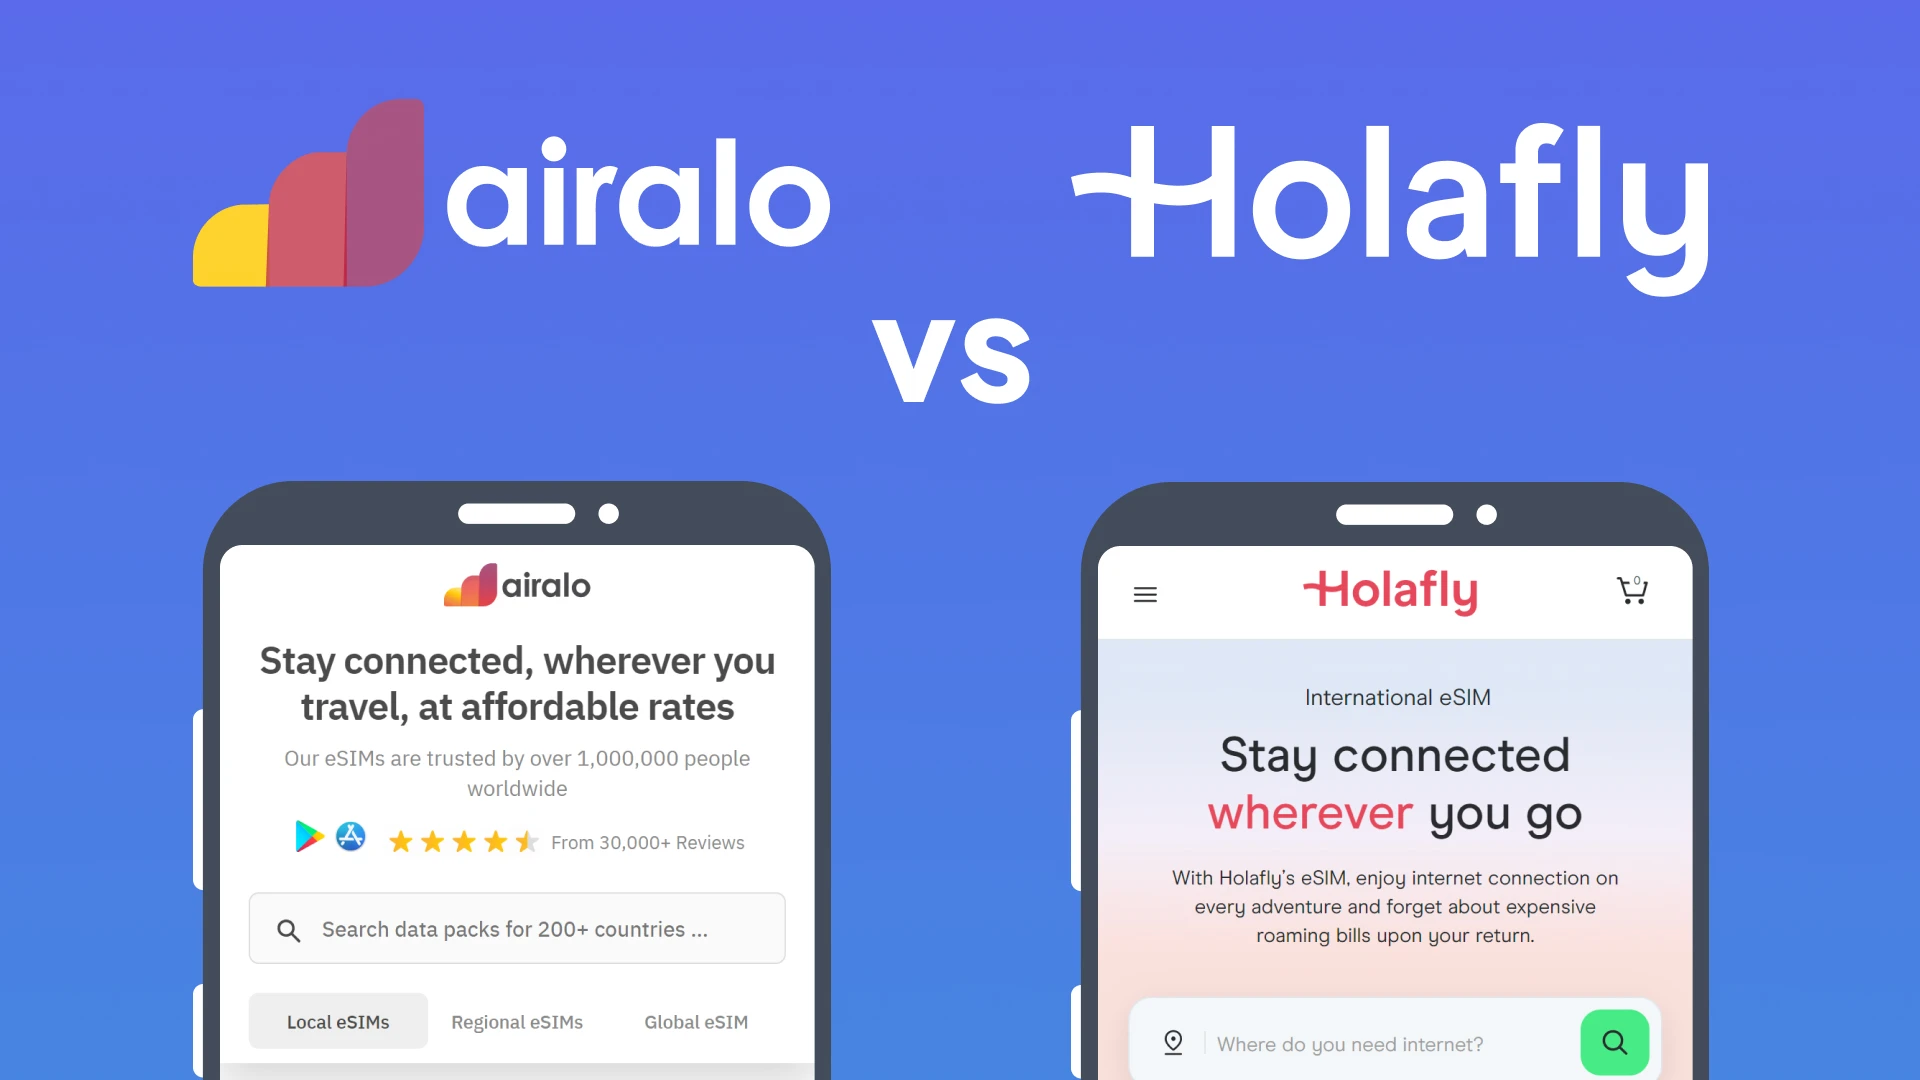 FR/FEATURED_IMAGES/airalo-vs-holafly.webp